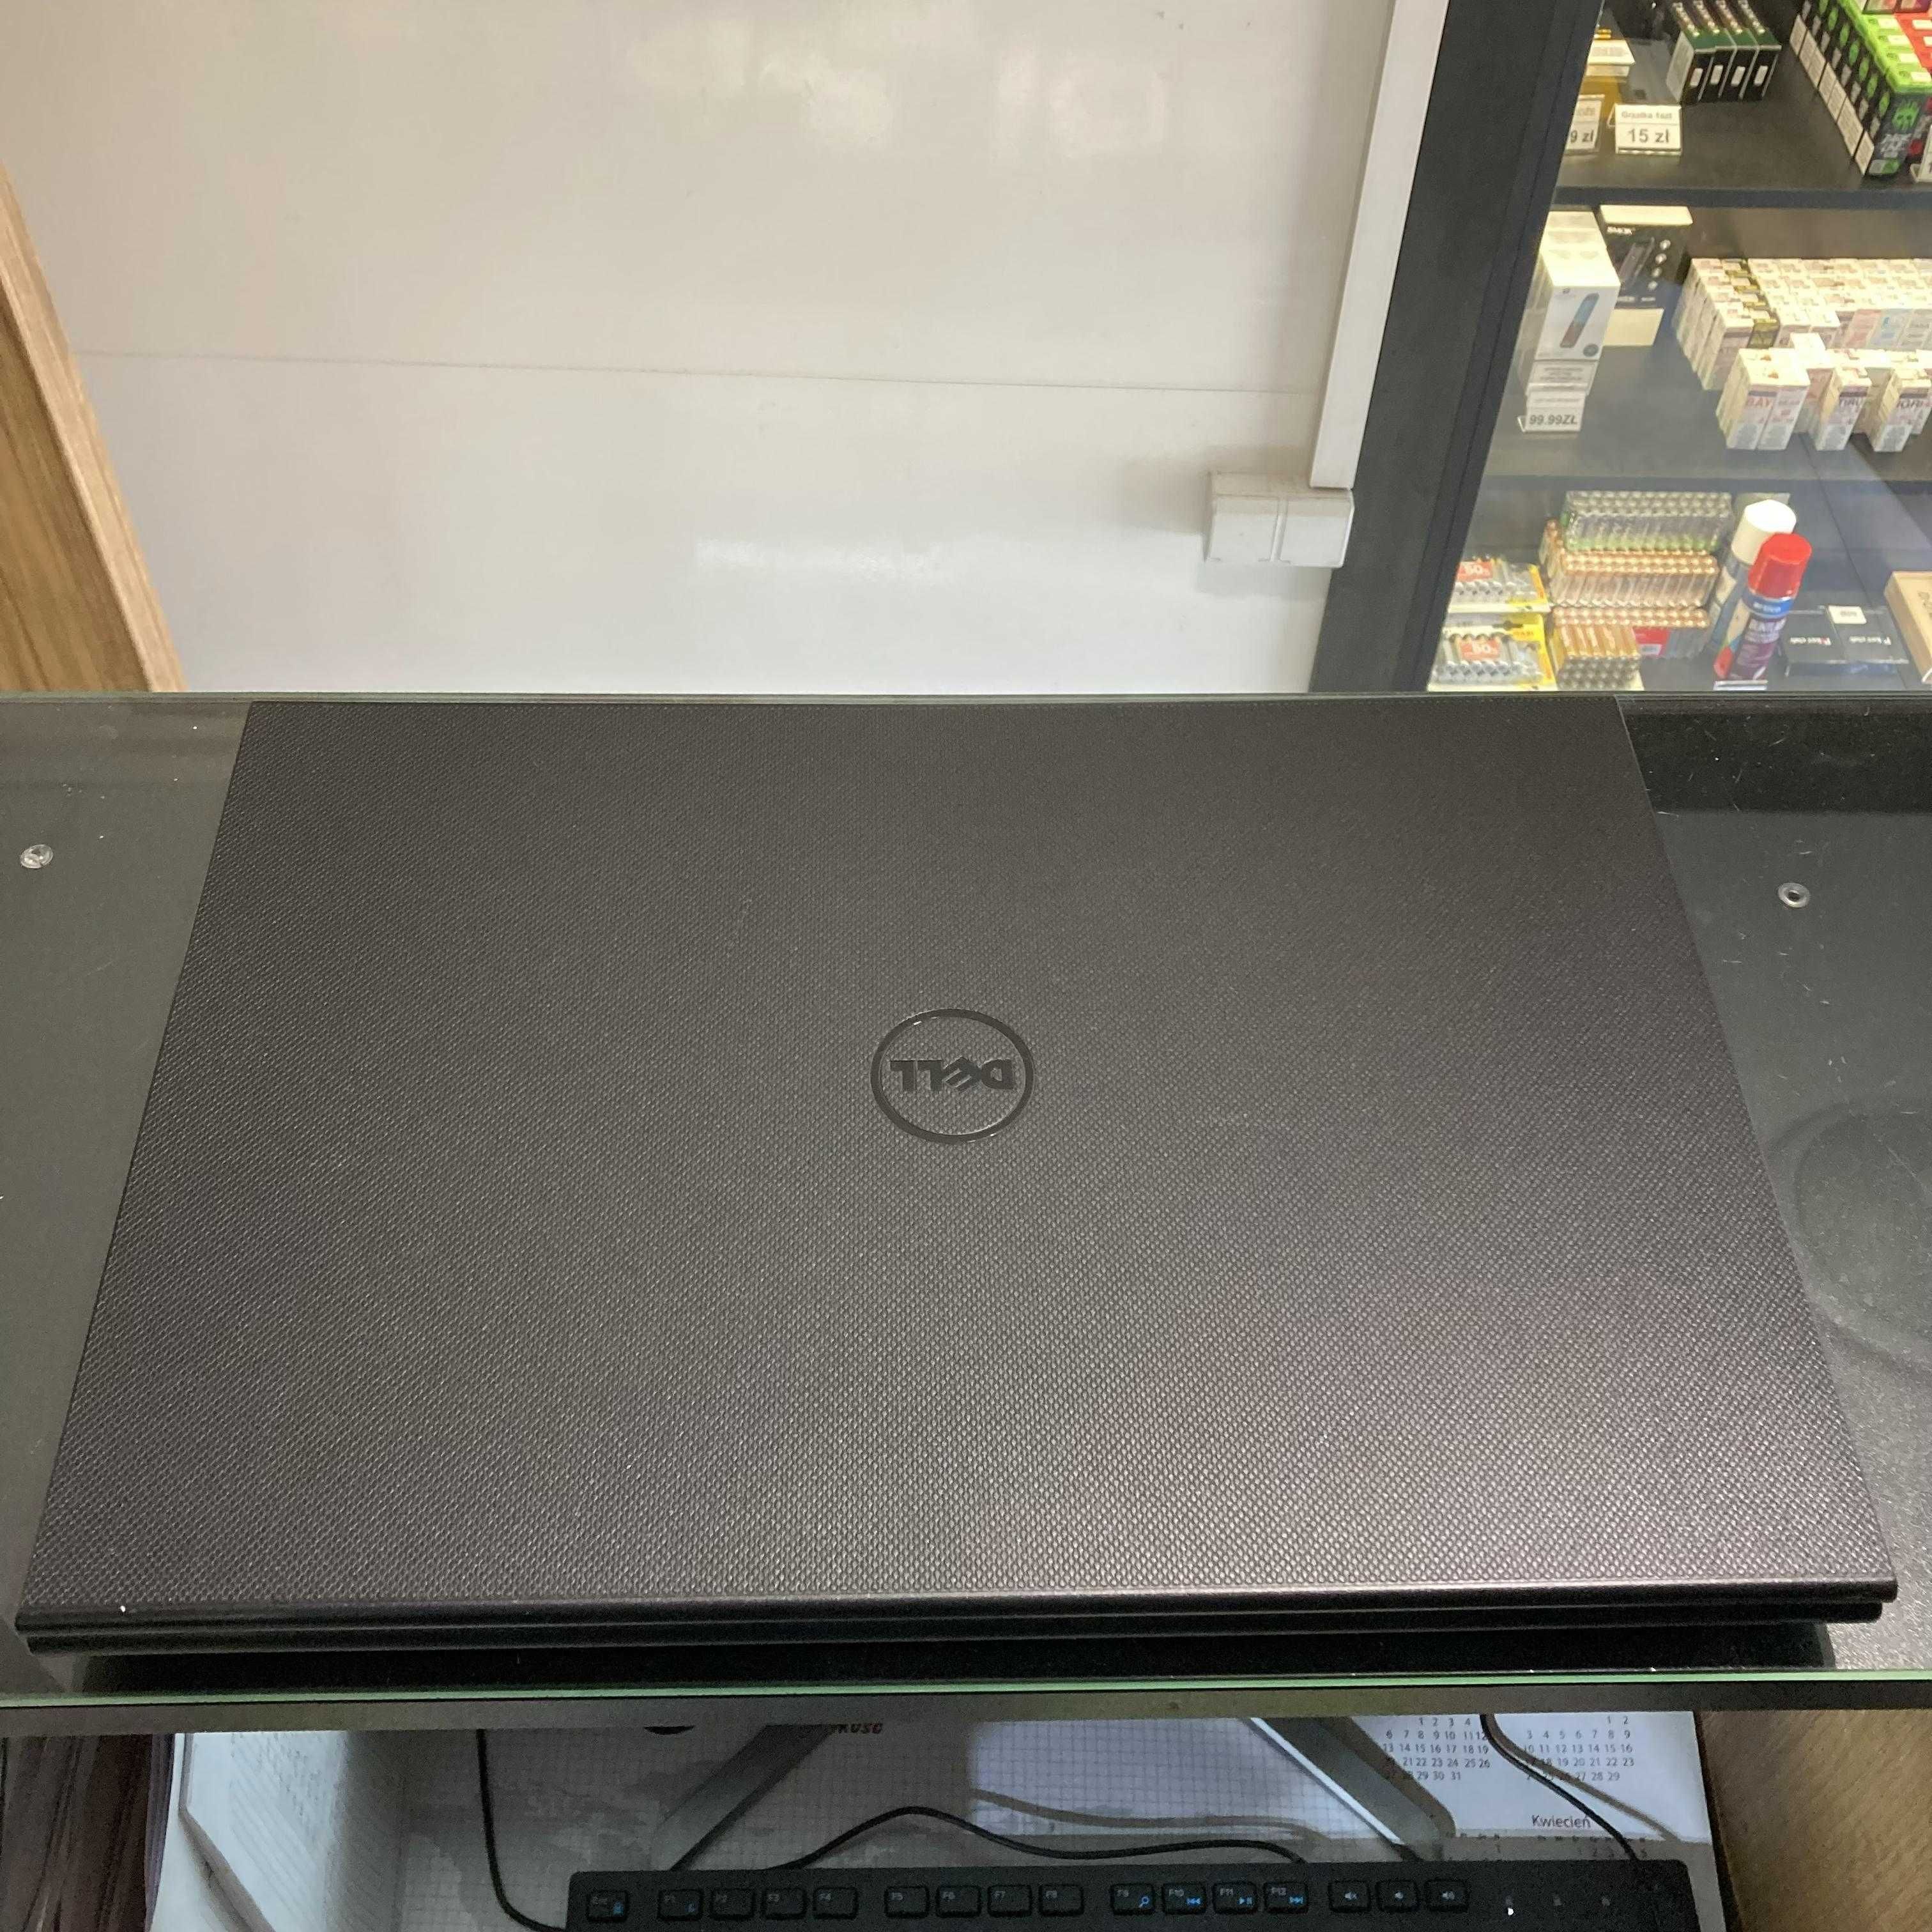 Laptop Dell Inspiron 15 128GB SSD 4GB Ram 1.90Ghz Pentium 820mGeforce